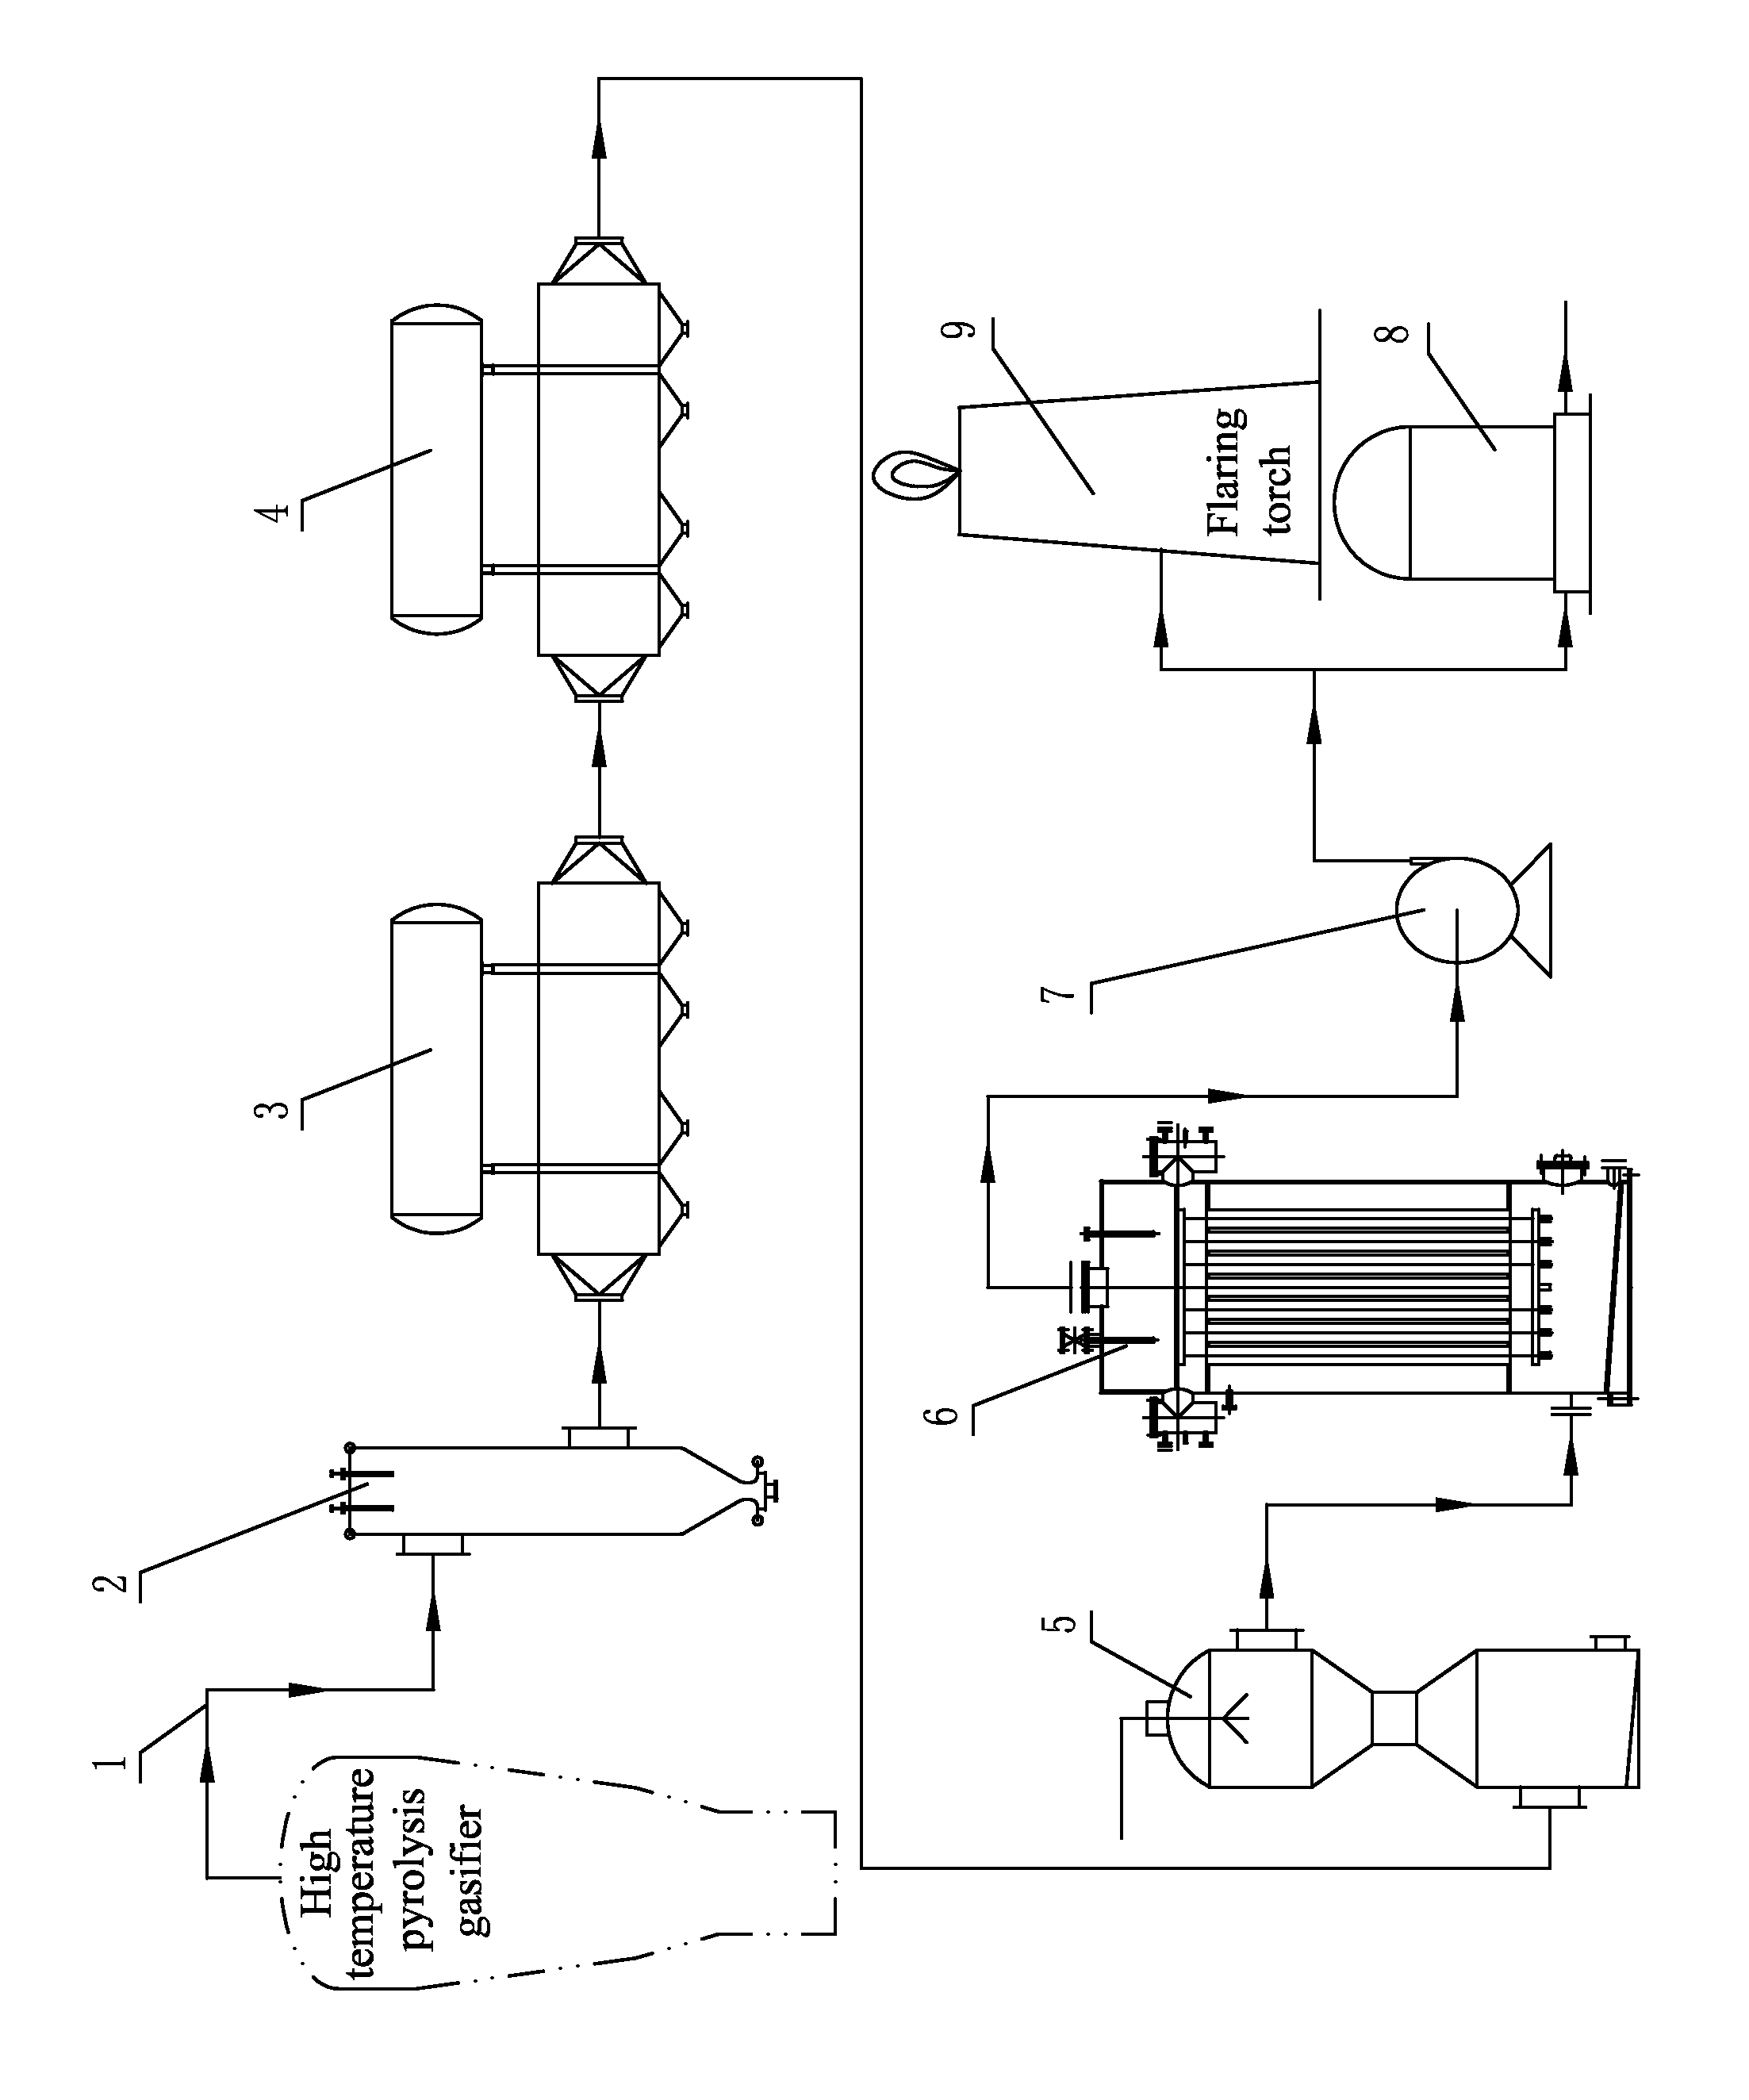 Method of purification of biomass syngas under negative pressure